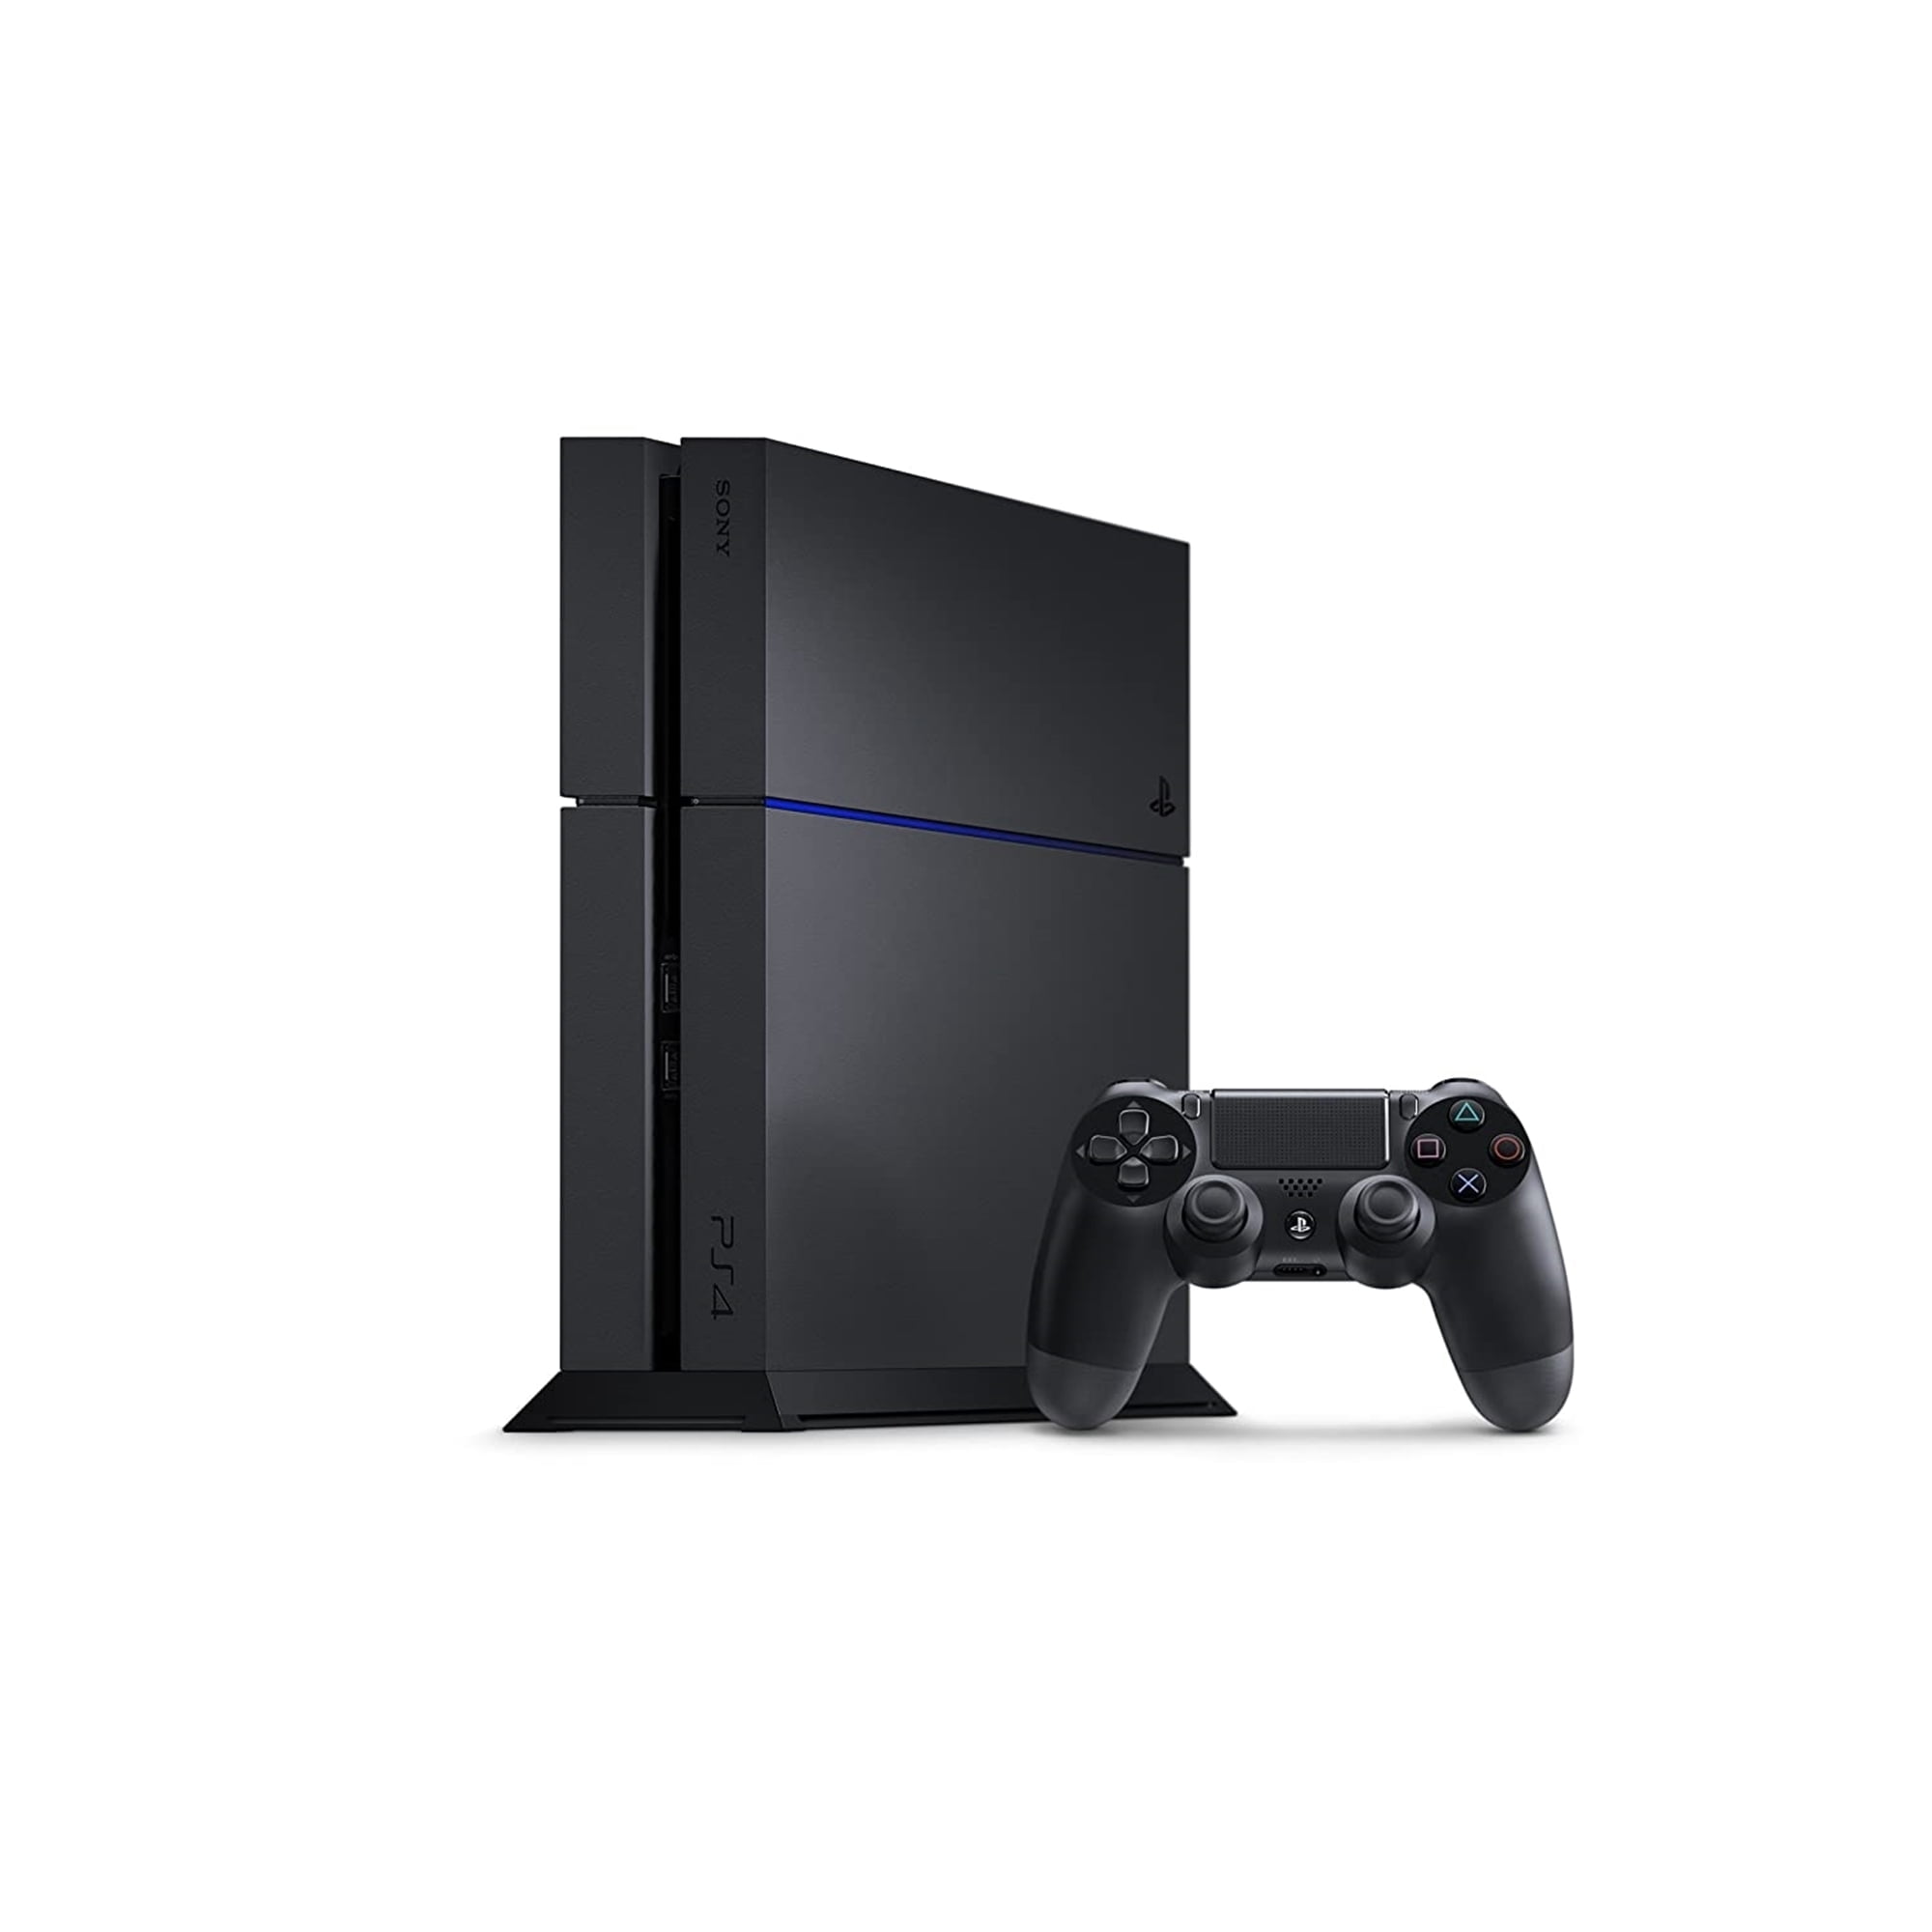 Restored Console SonyPS4 PlayStation 4 500GB - CUH-1115A - Device Only  (Refurbished)